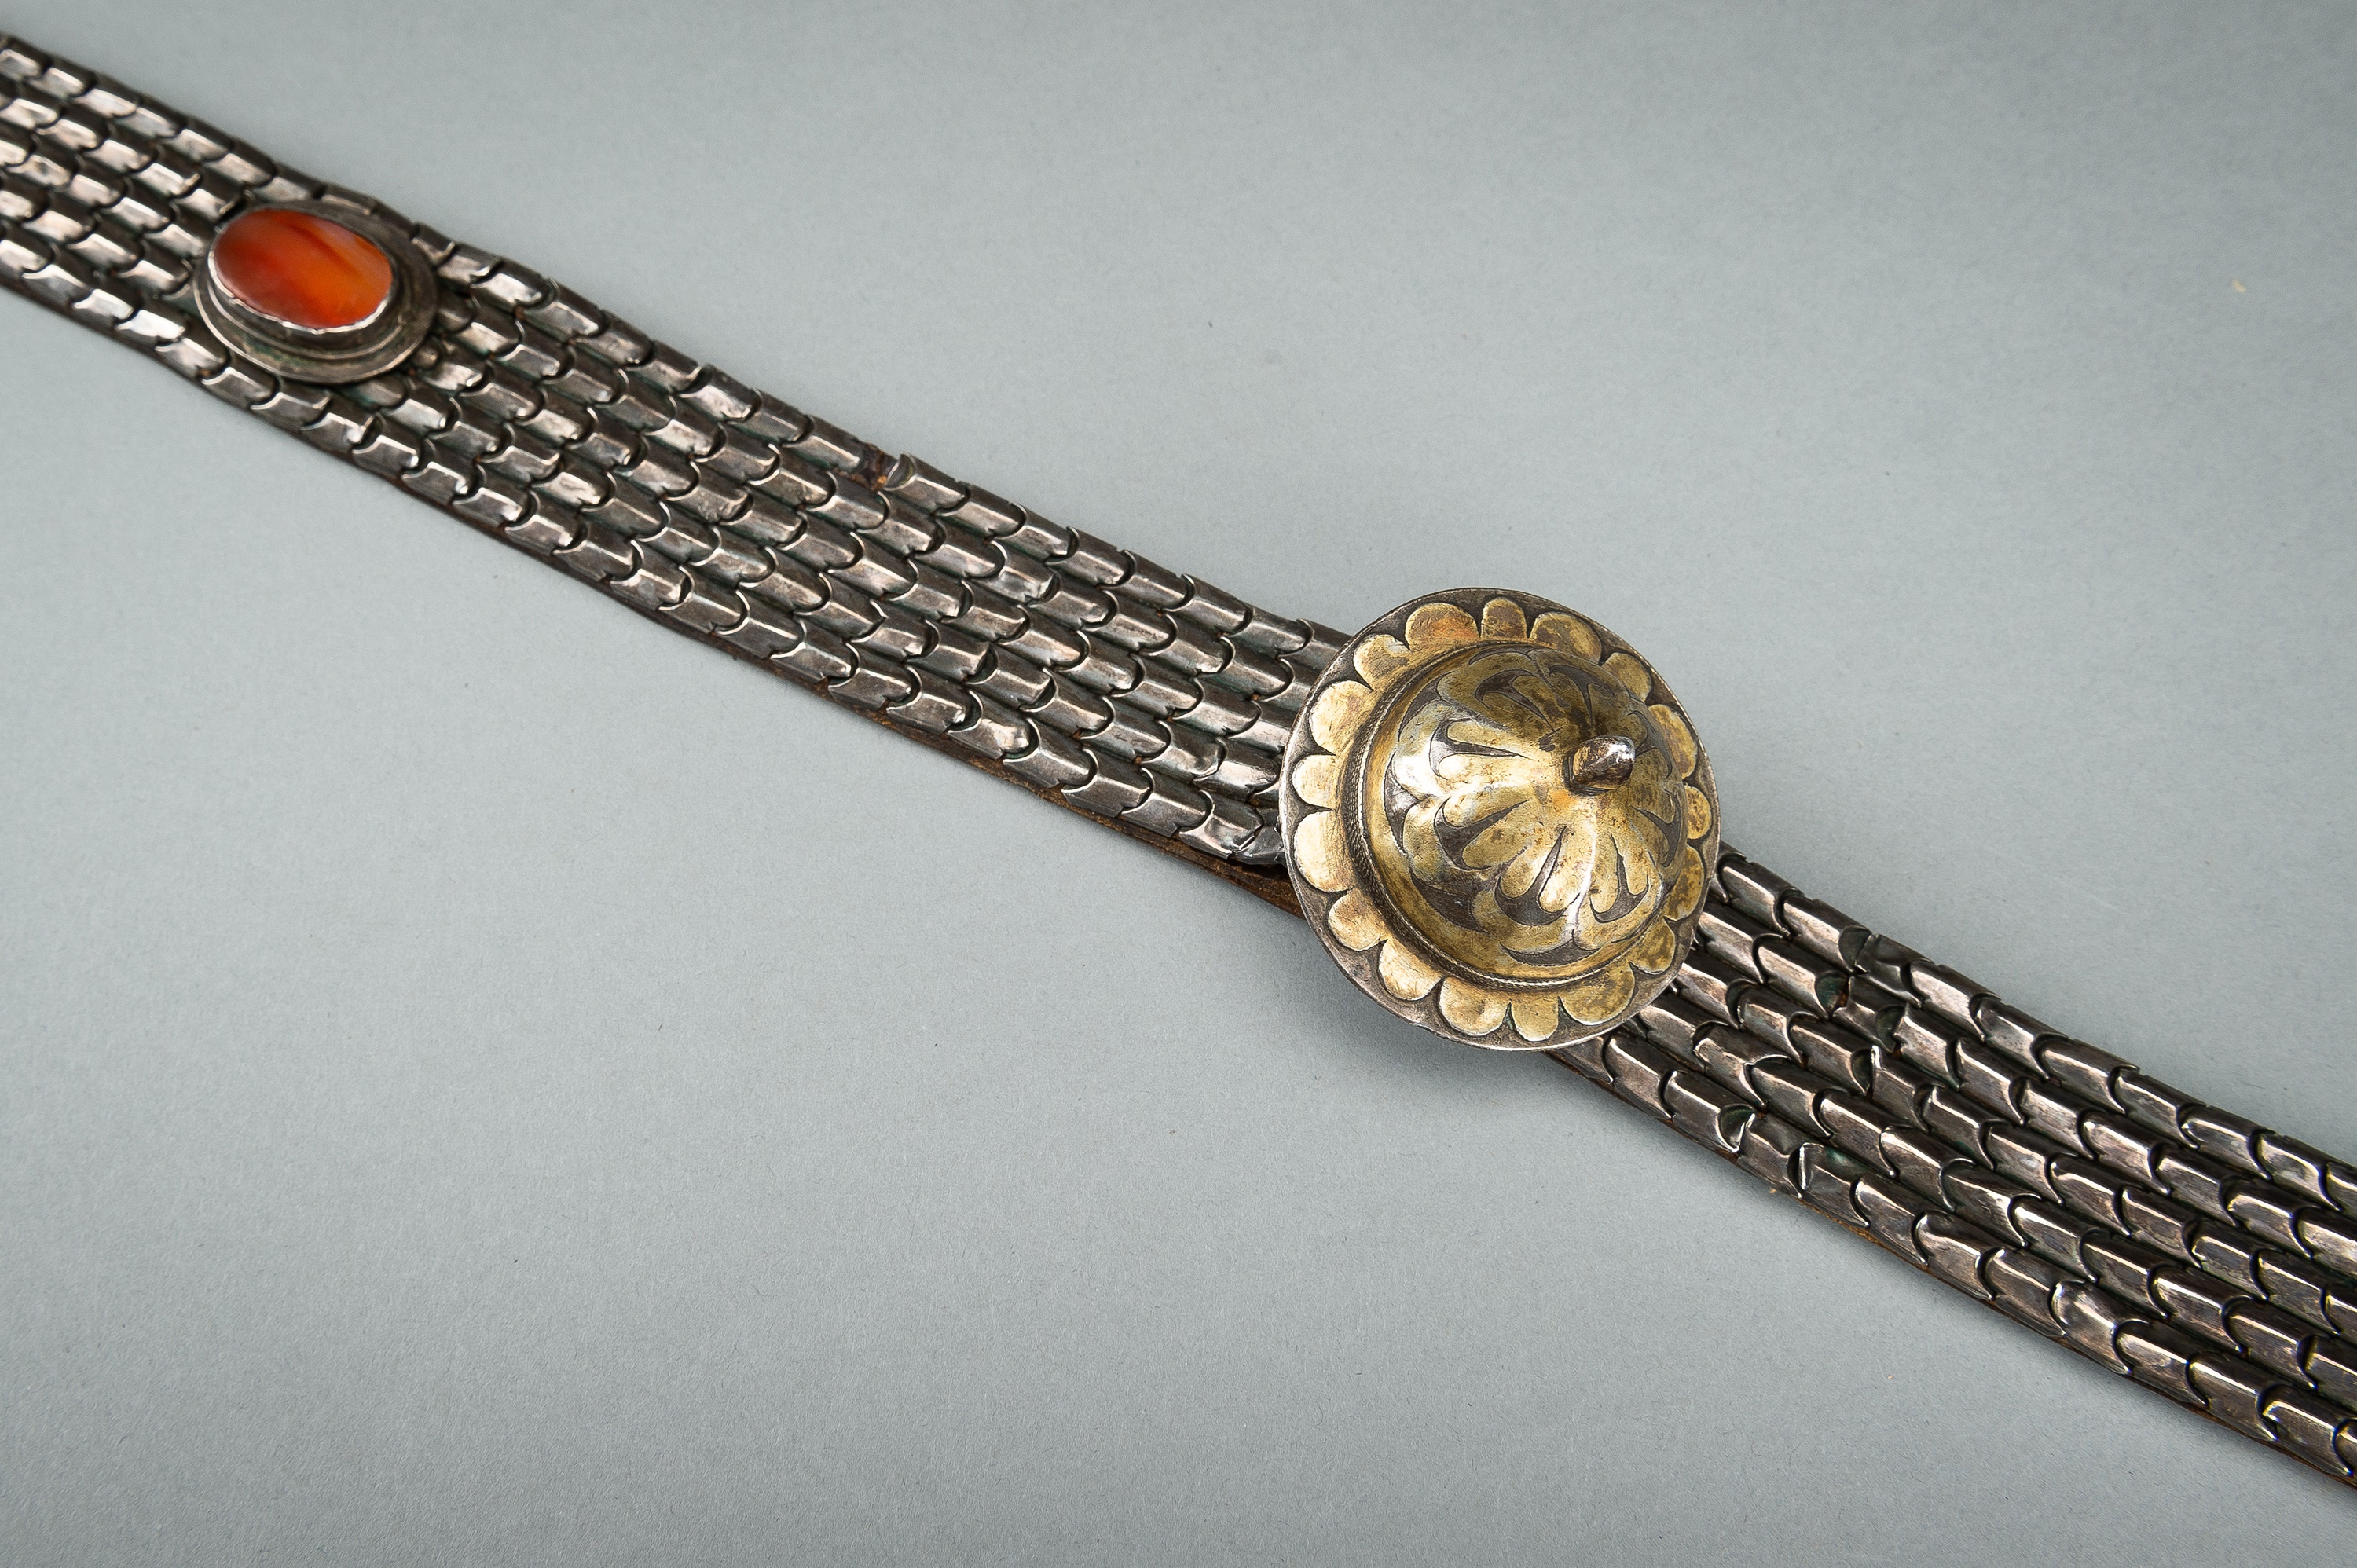 AN OTTOMAN LEATHER BELT SET WITH CARNELIANS AND SILVER - Image 5 of 12